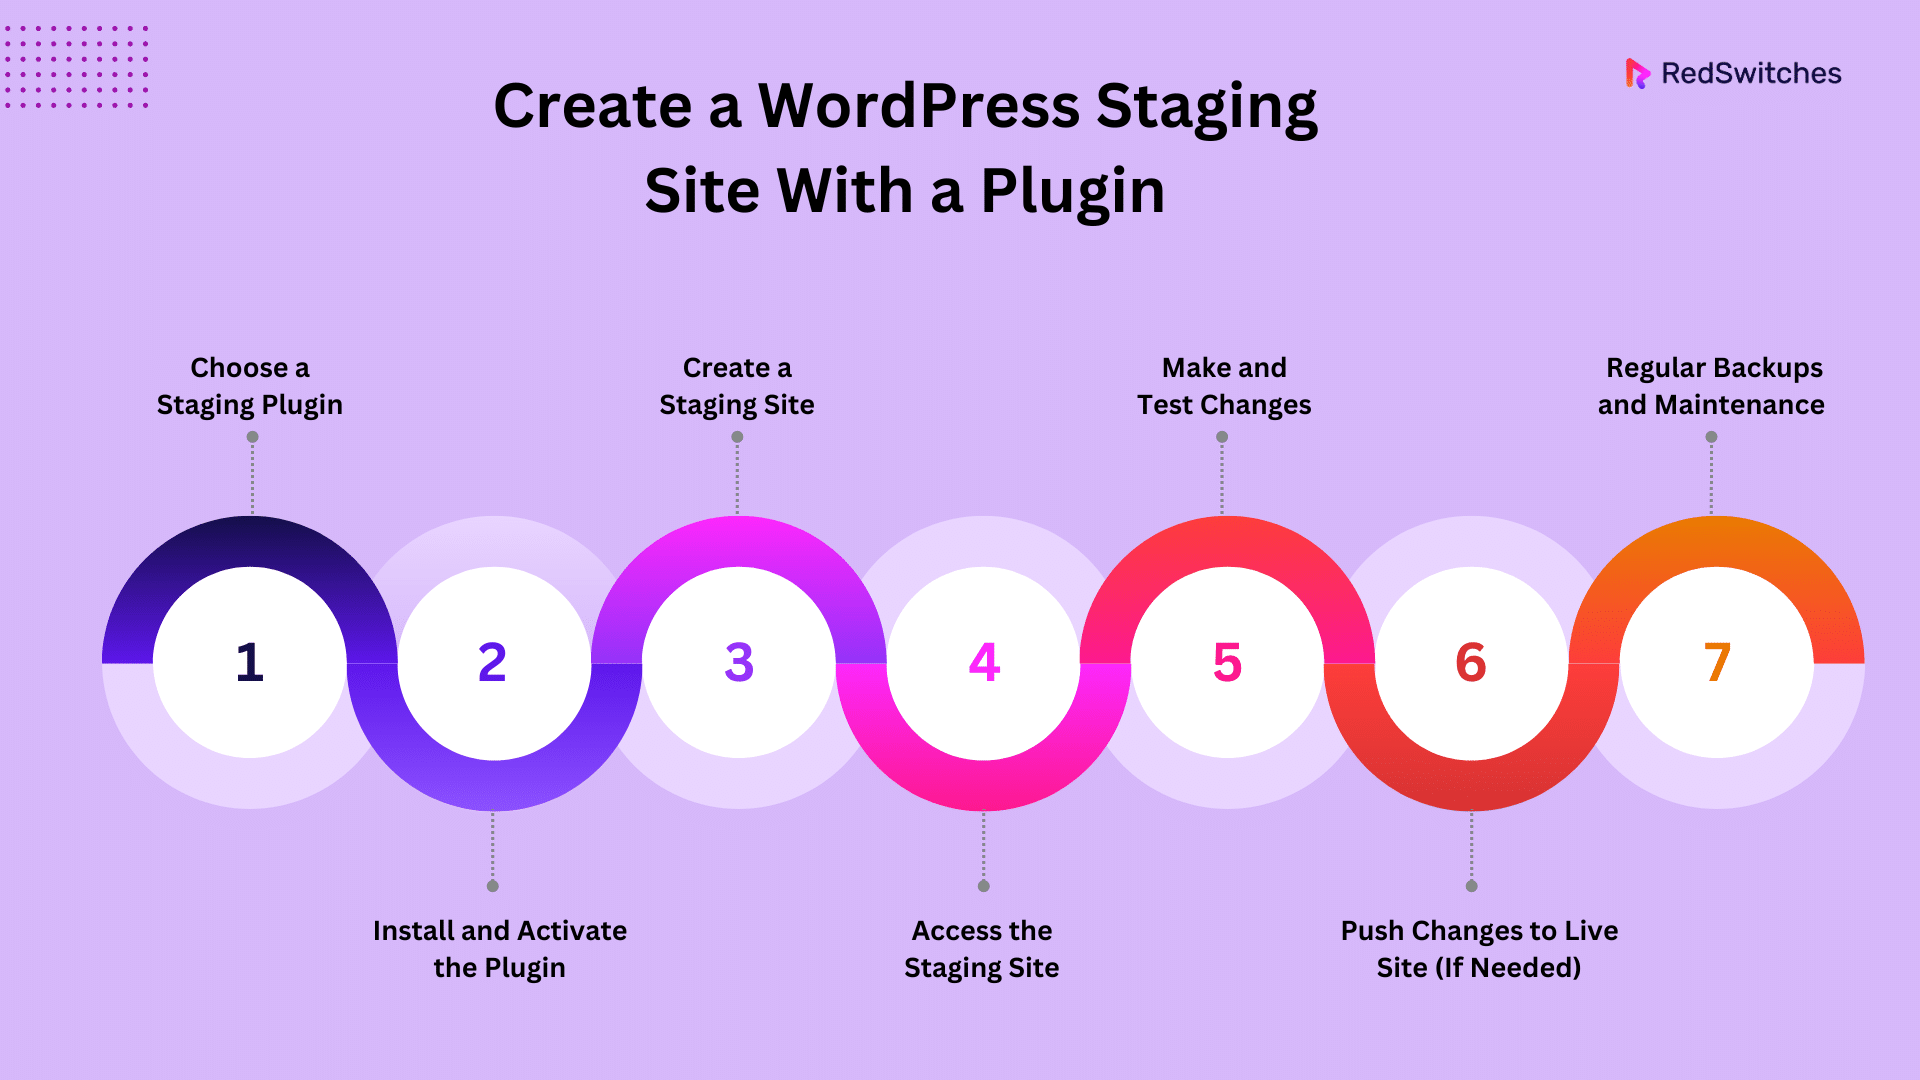 Create a WordPress Staging Site With a Plugin